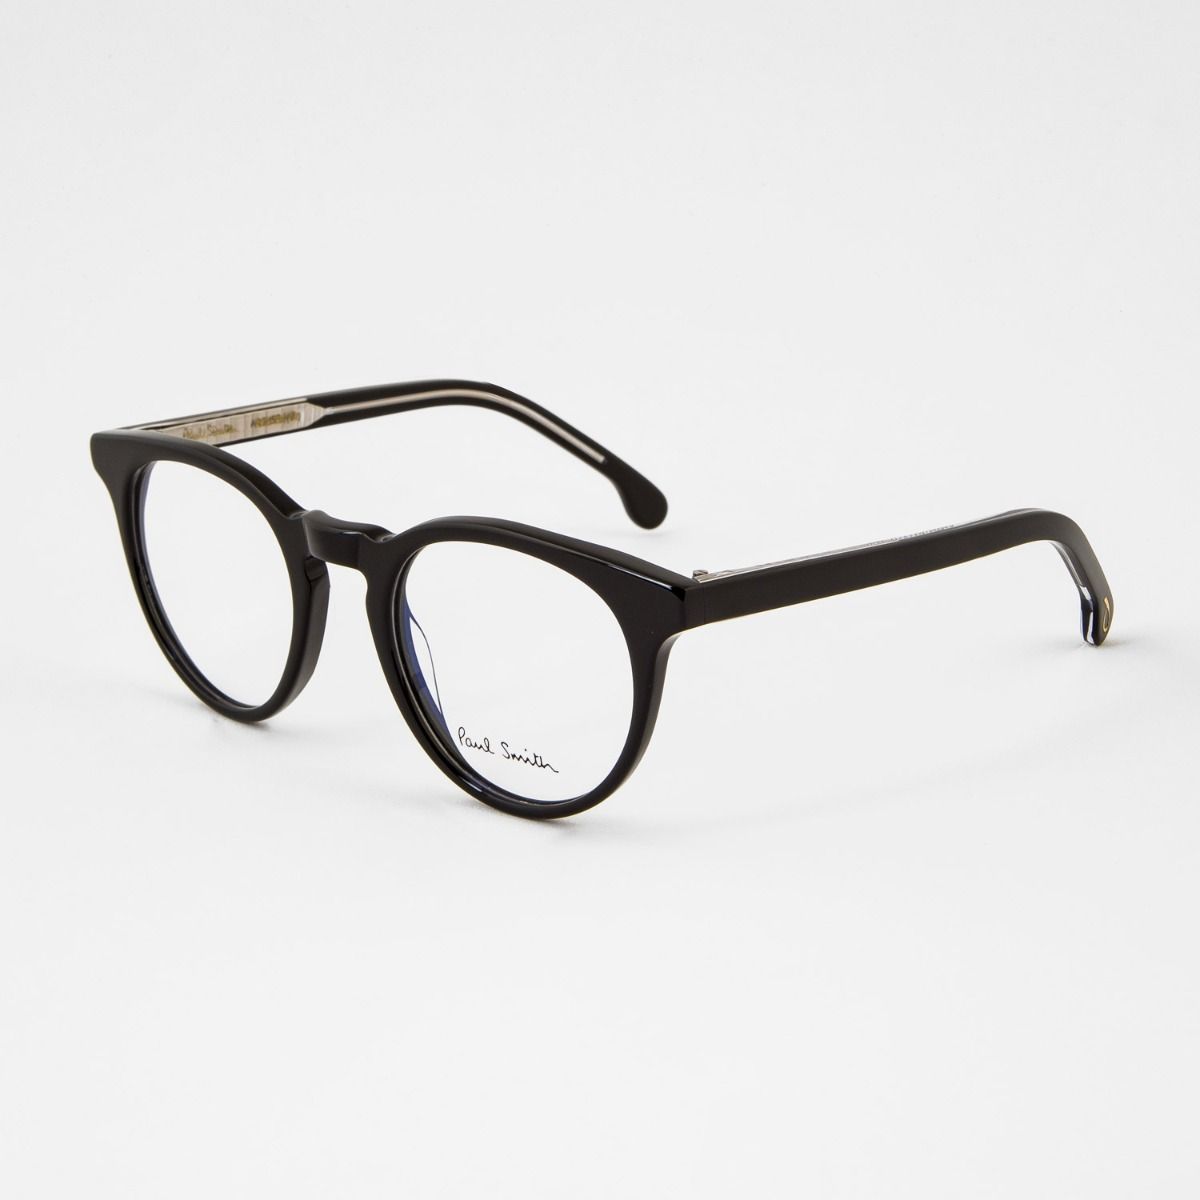 Paul Smith Archer Optical Round Glasses (Large)